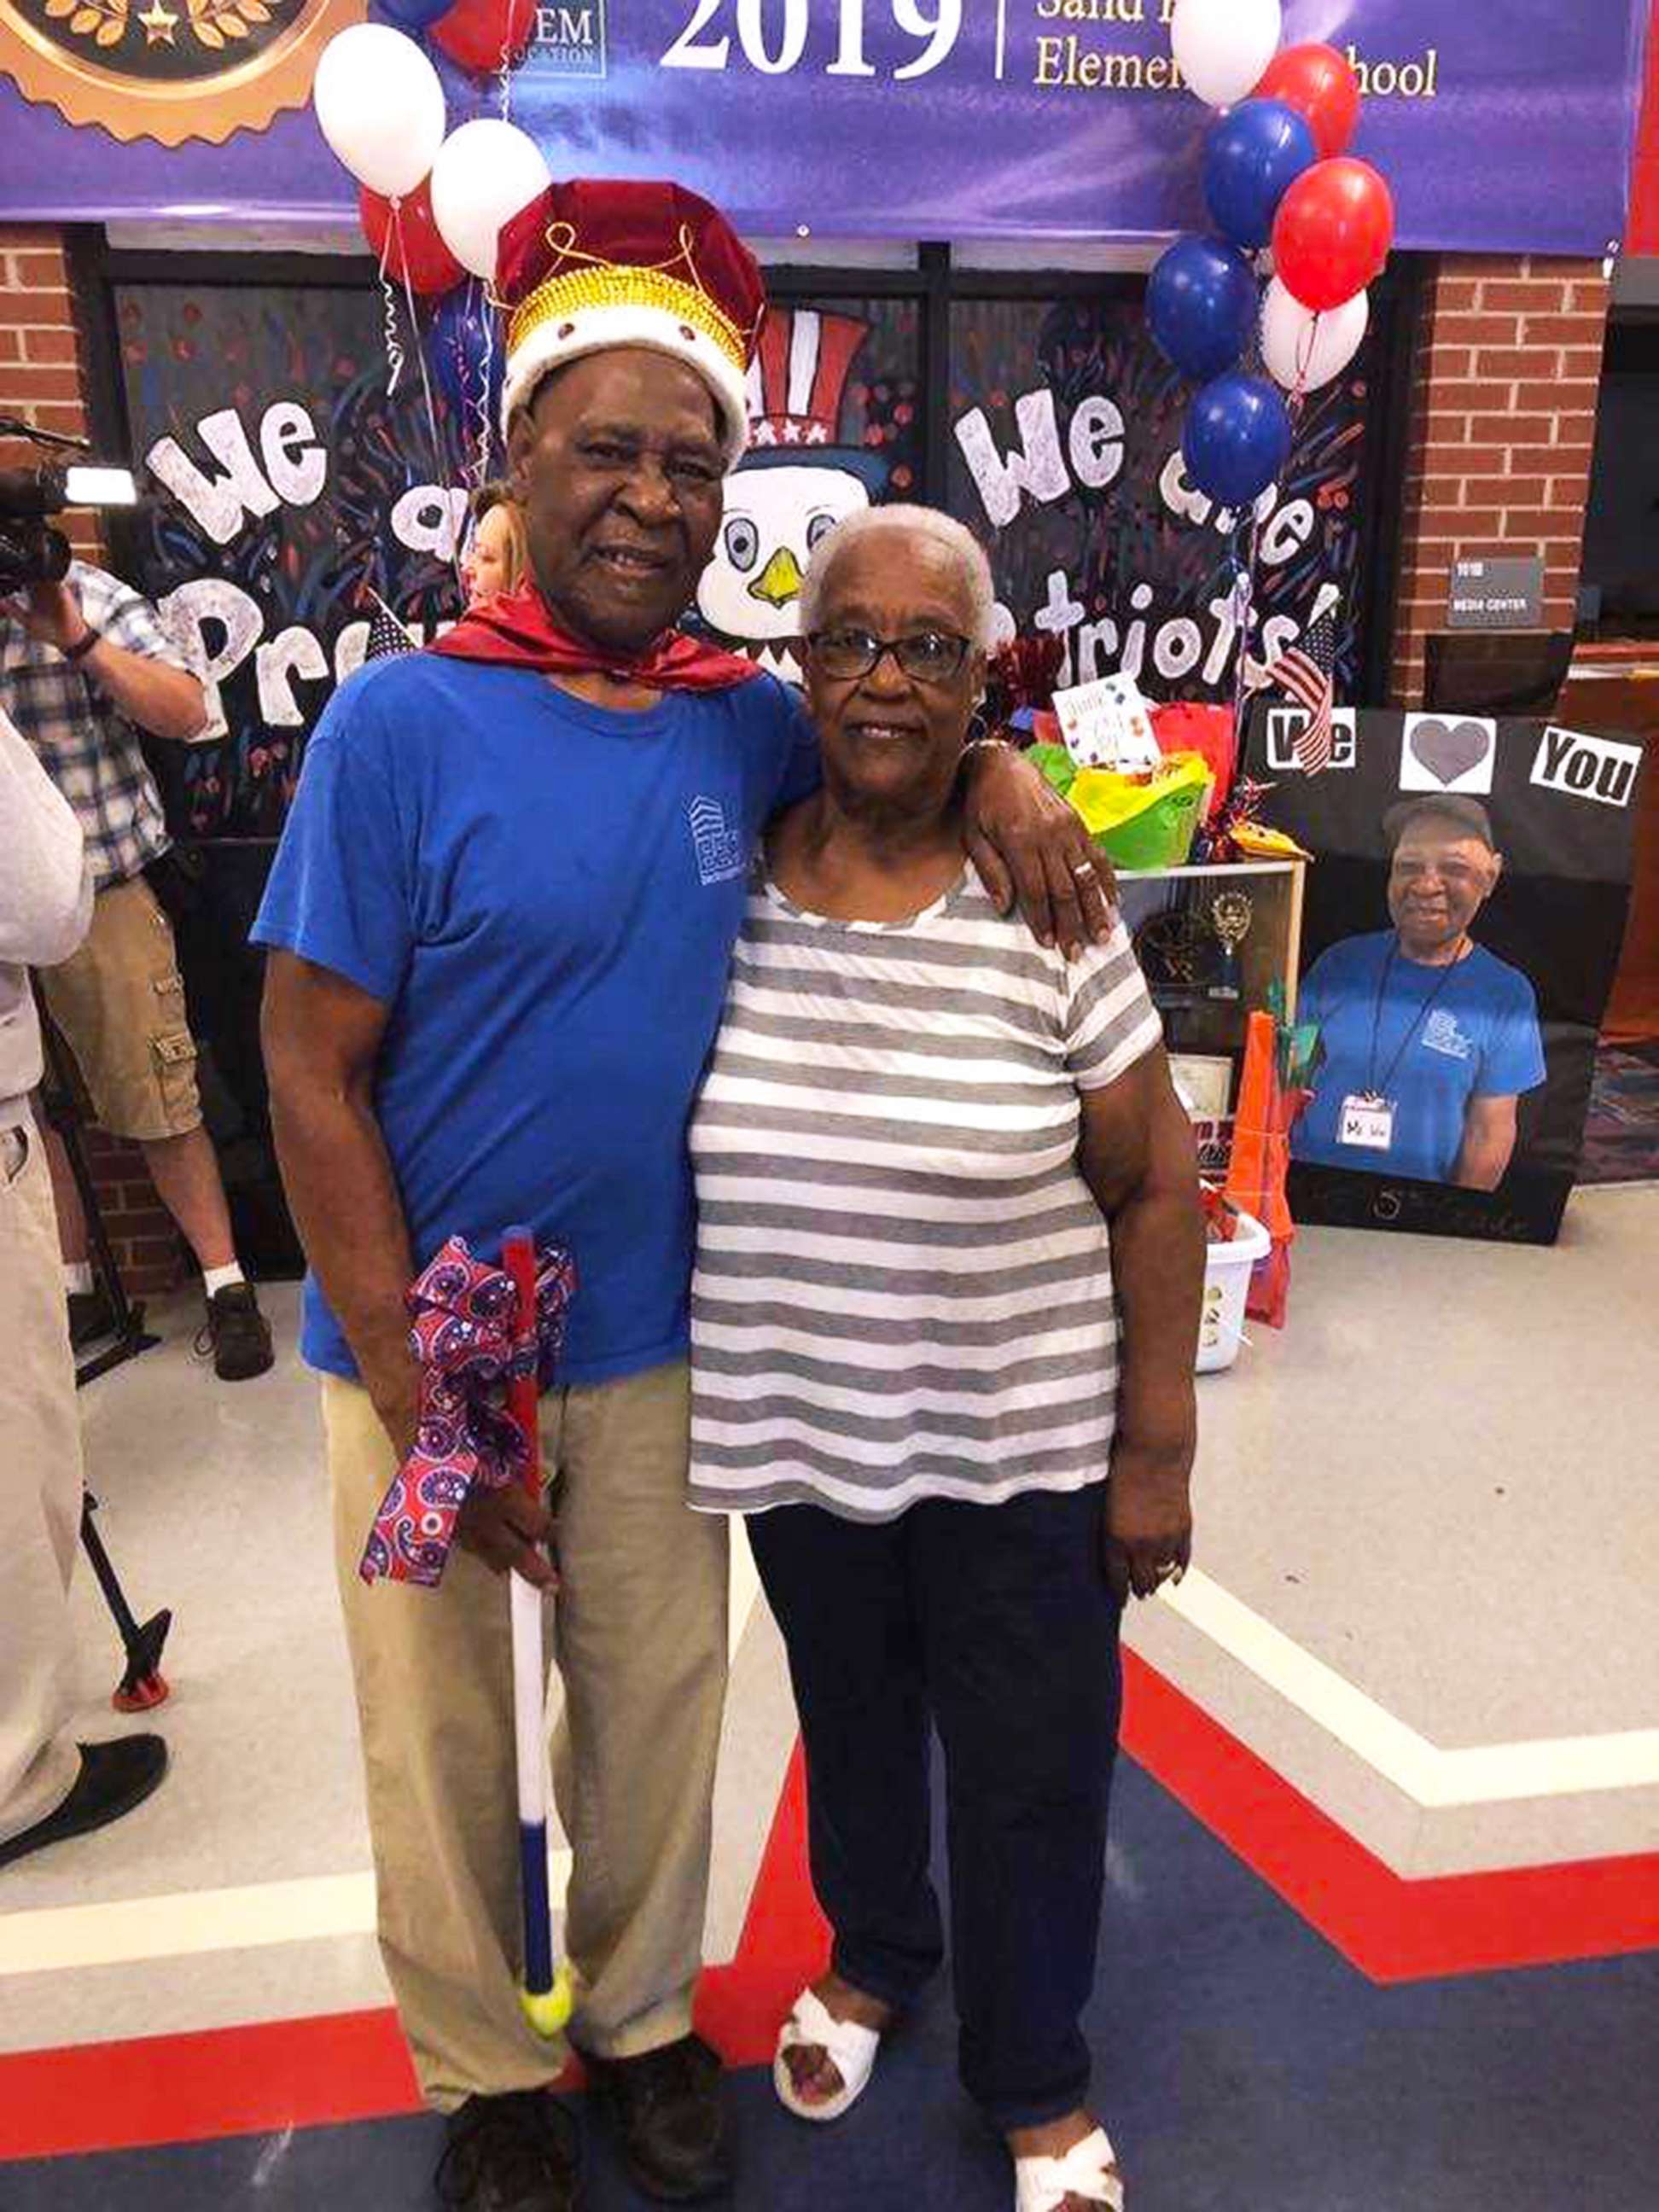 PHOTO: John Lockett, 83, a janitor at Sand Hill Elementary School in Carrollton, GA, is photographed on May 17, 2019, with his wife of 25 years, Annie Lockett.